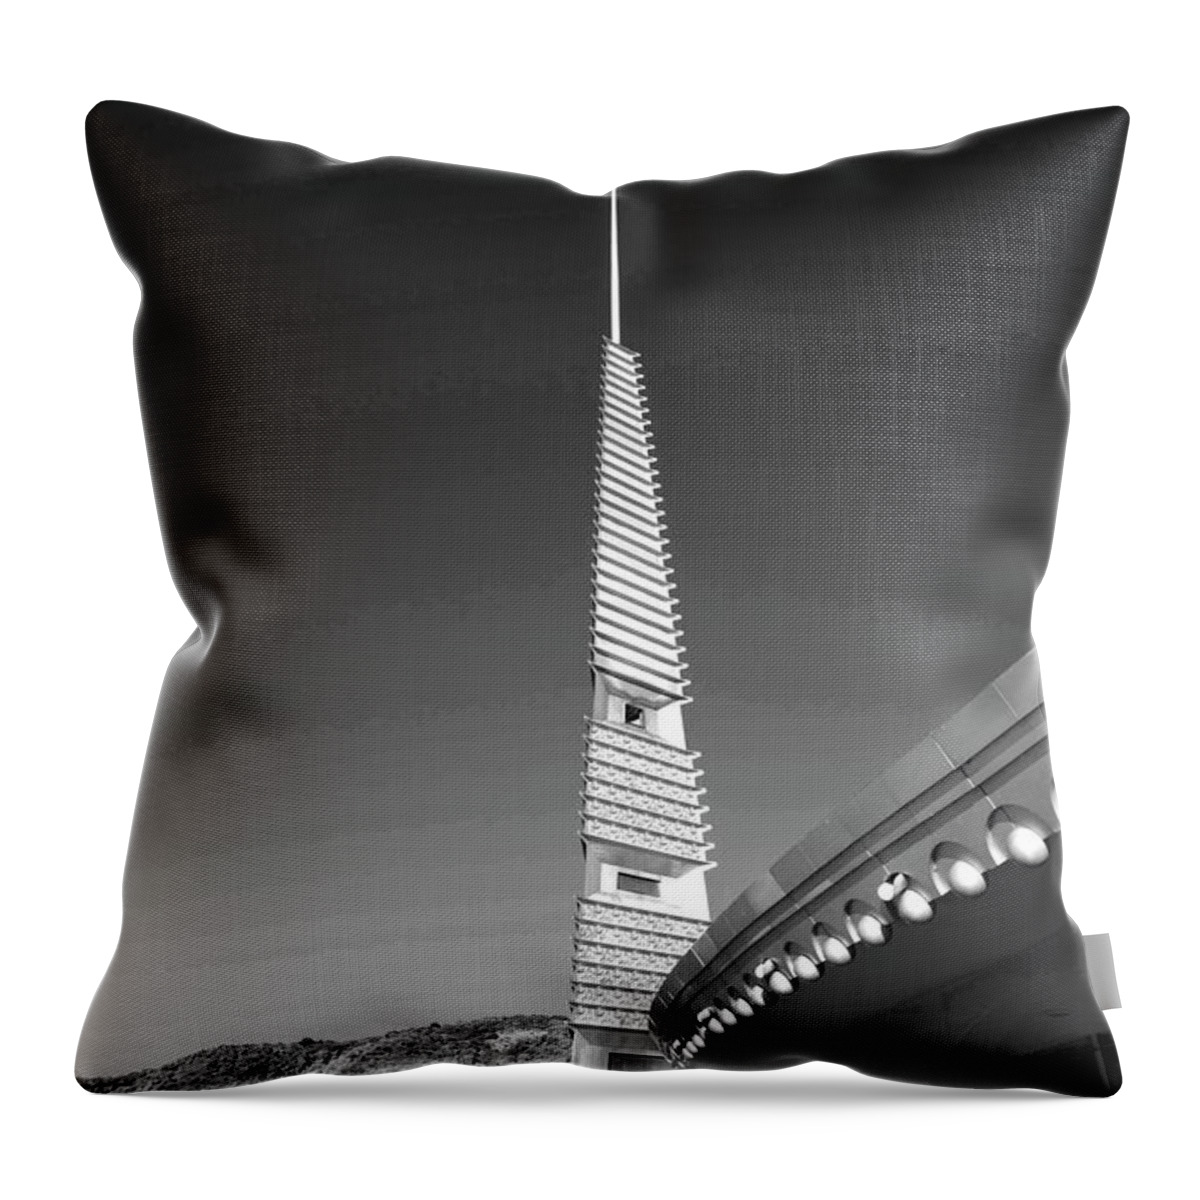 Infrared Throw Pillow featuring the photograph Marin County Civic Center - Infrared by David Bearden